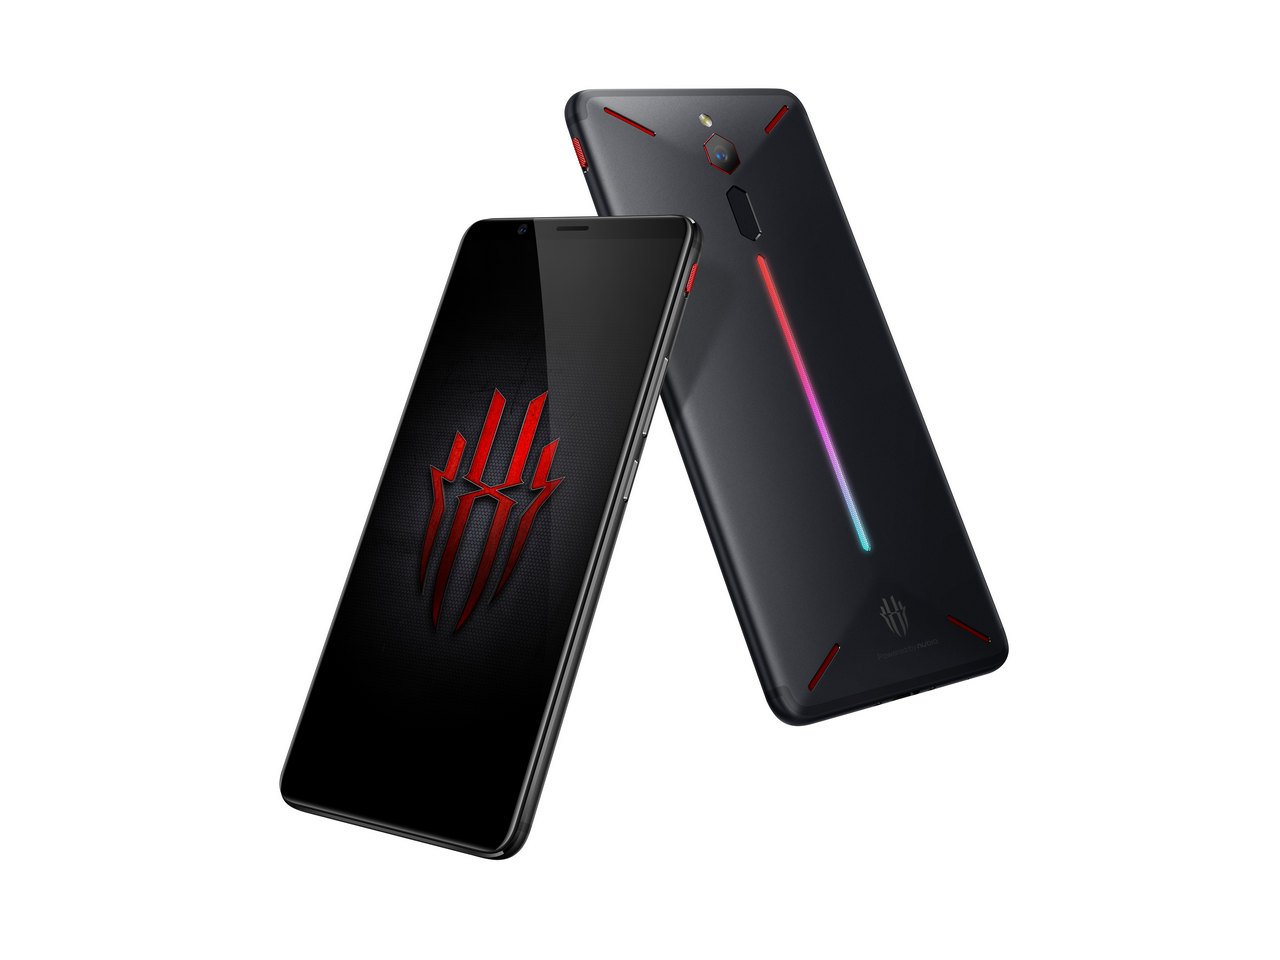 Nubia Red Magic Gaming Smartphone Launched, Comes With 5 ...
